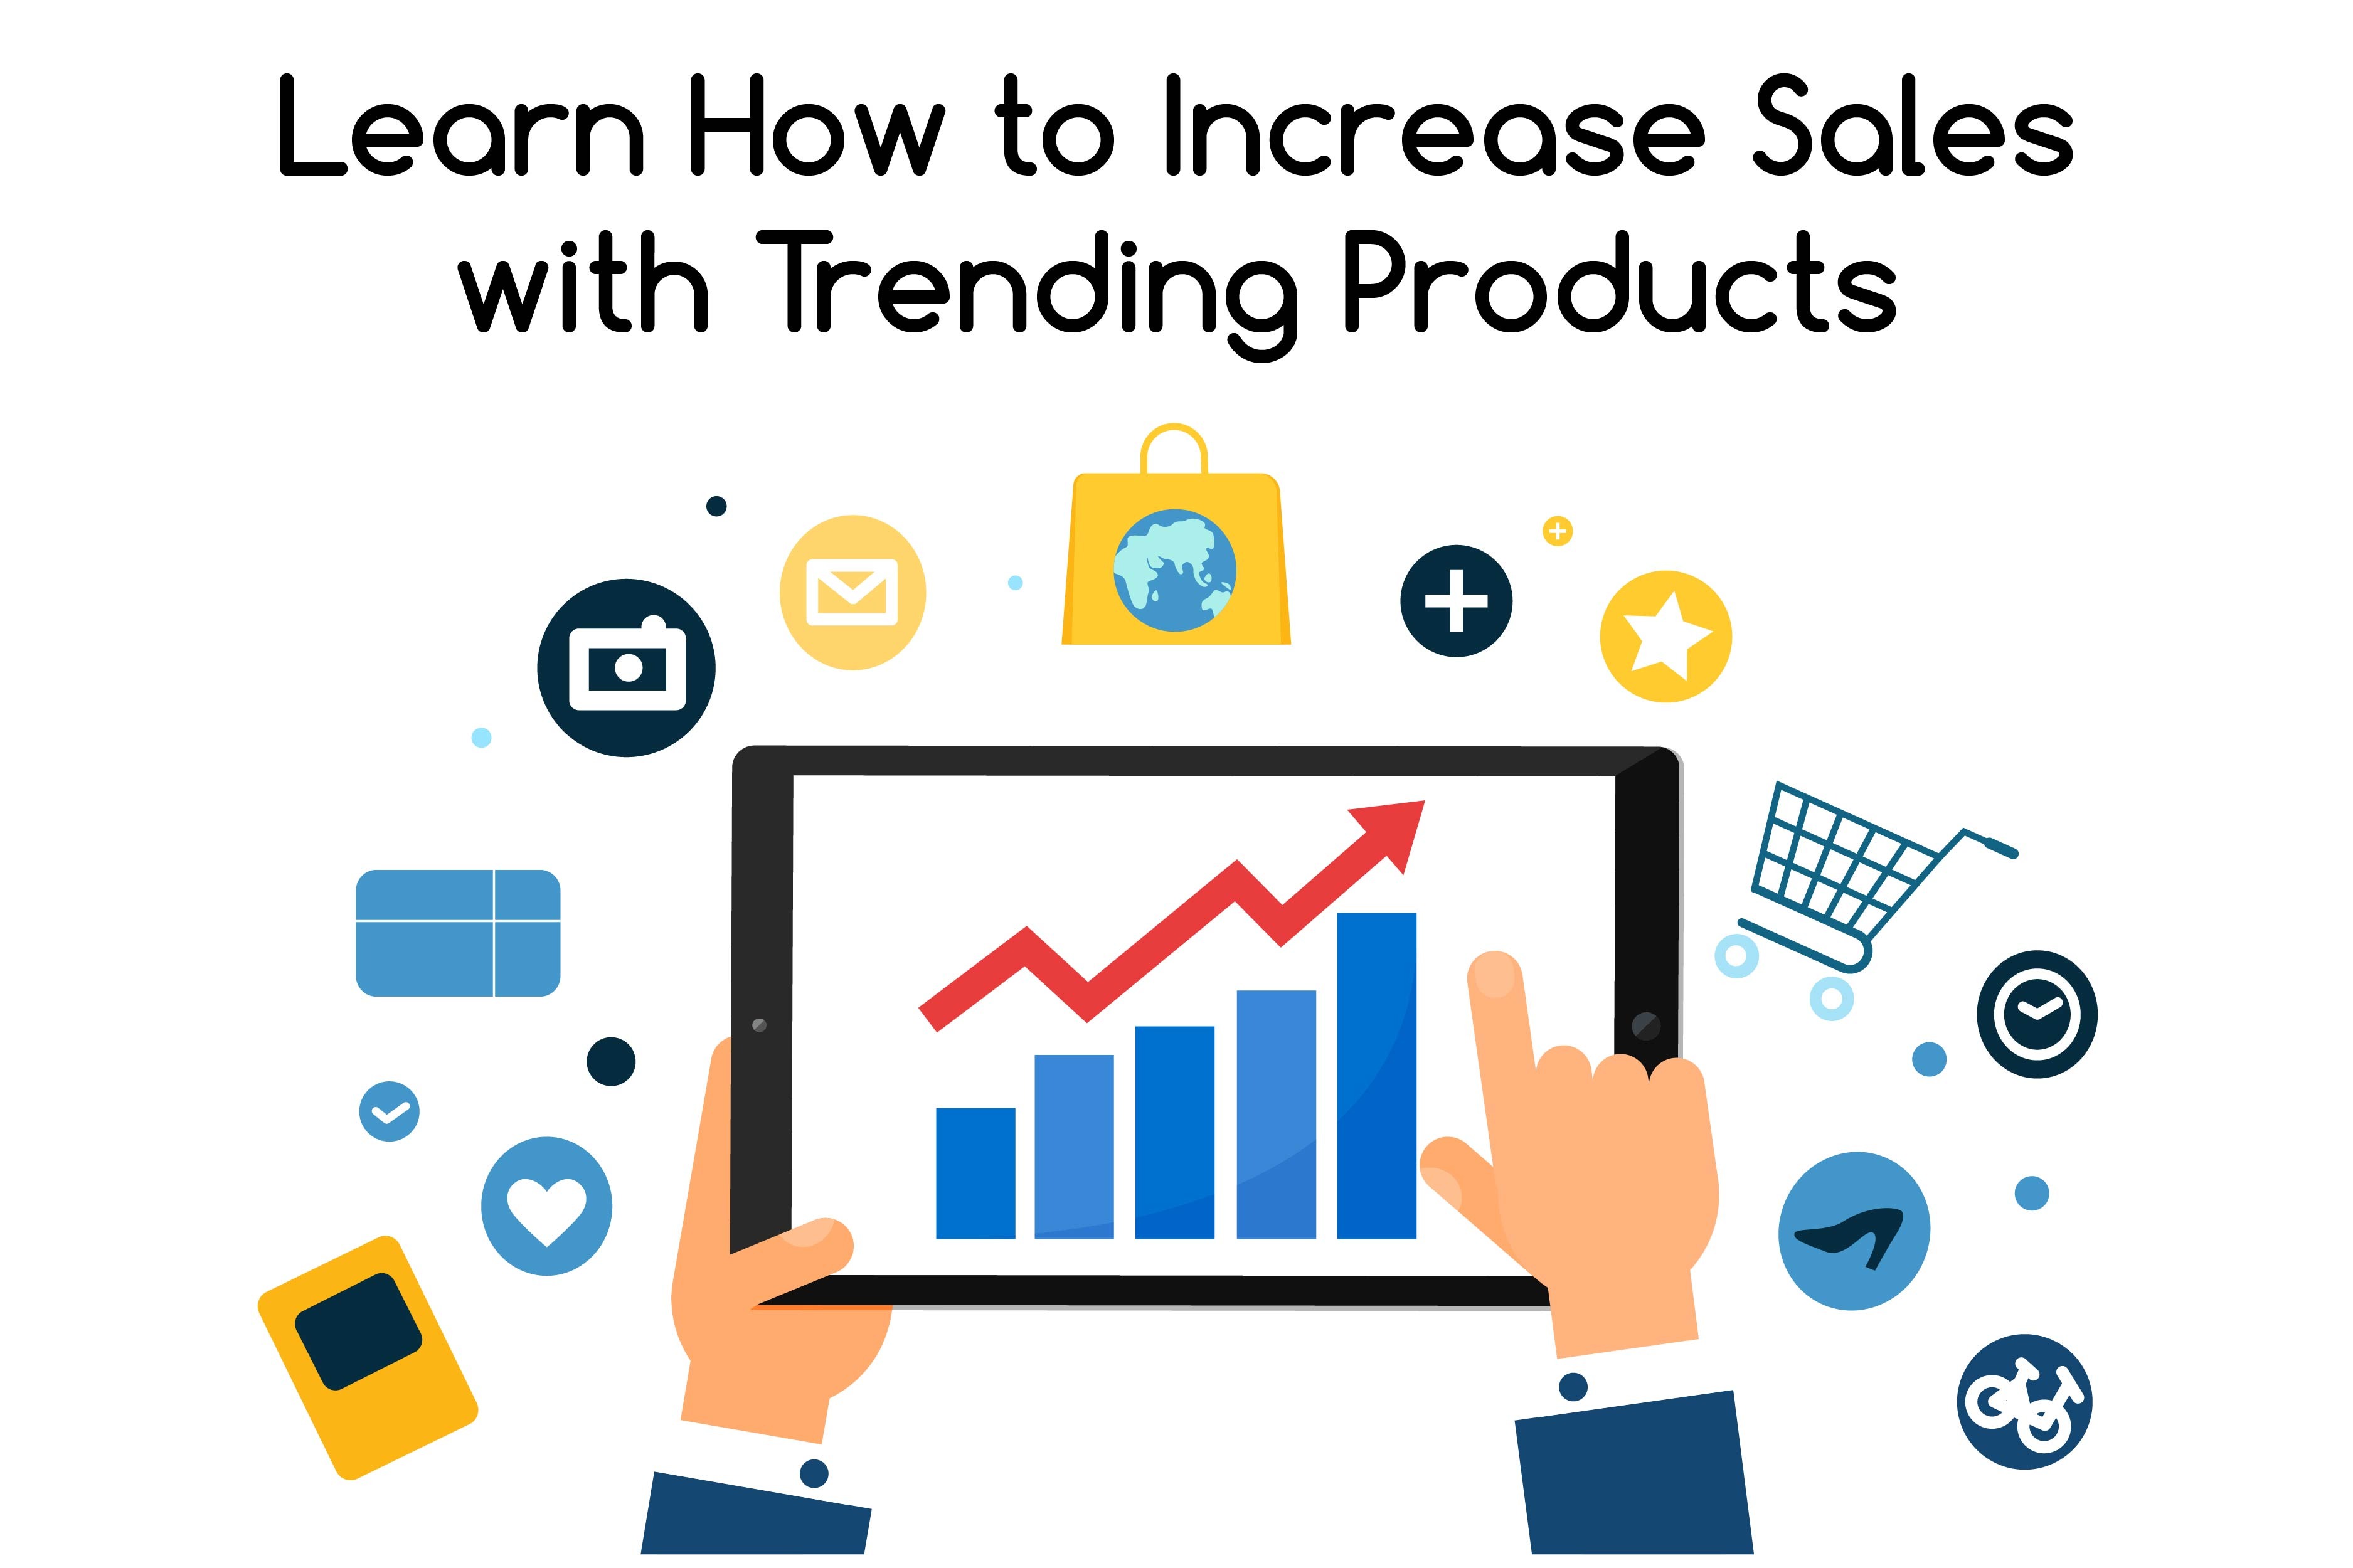 1000 Miles - Learn How to Increase Sales with Trending Products